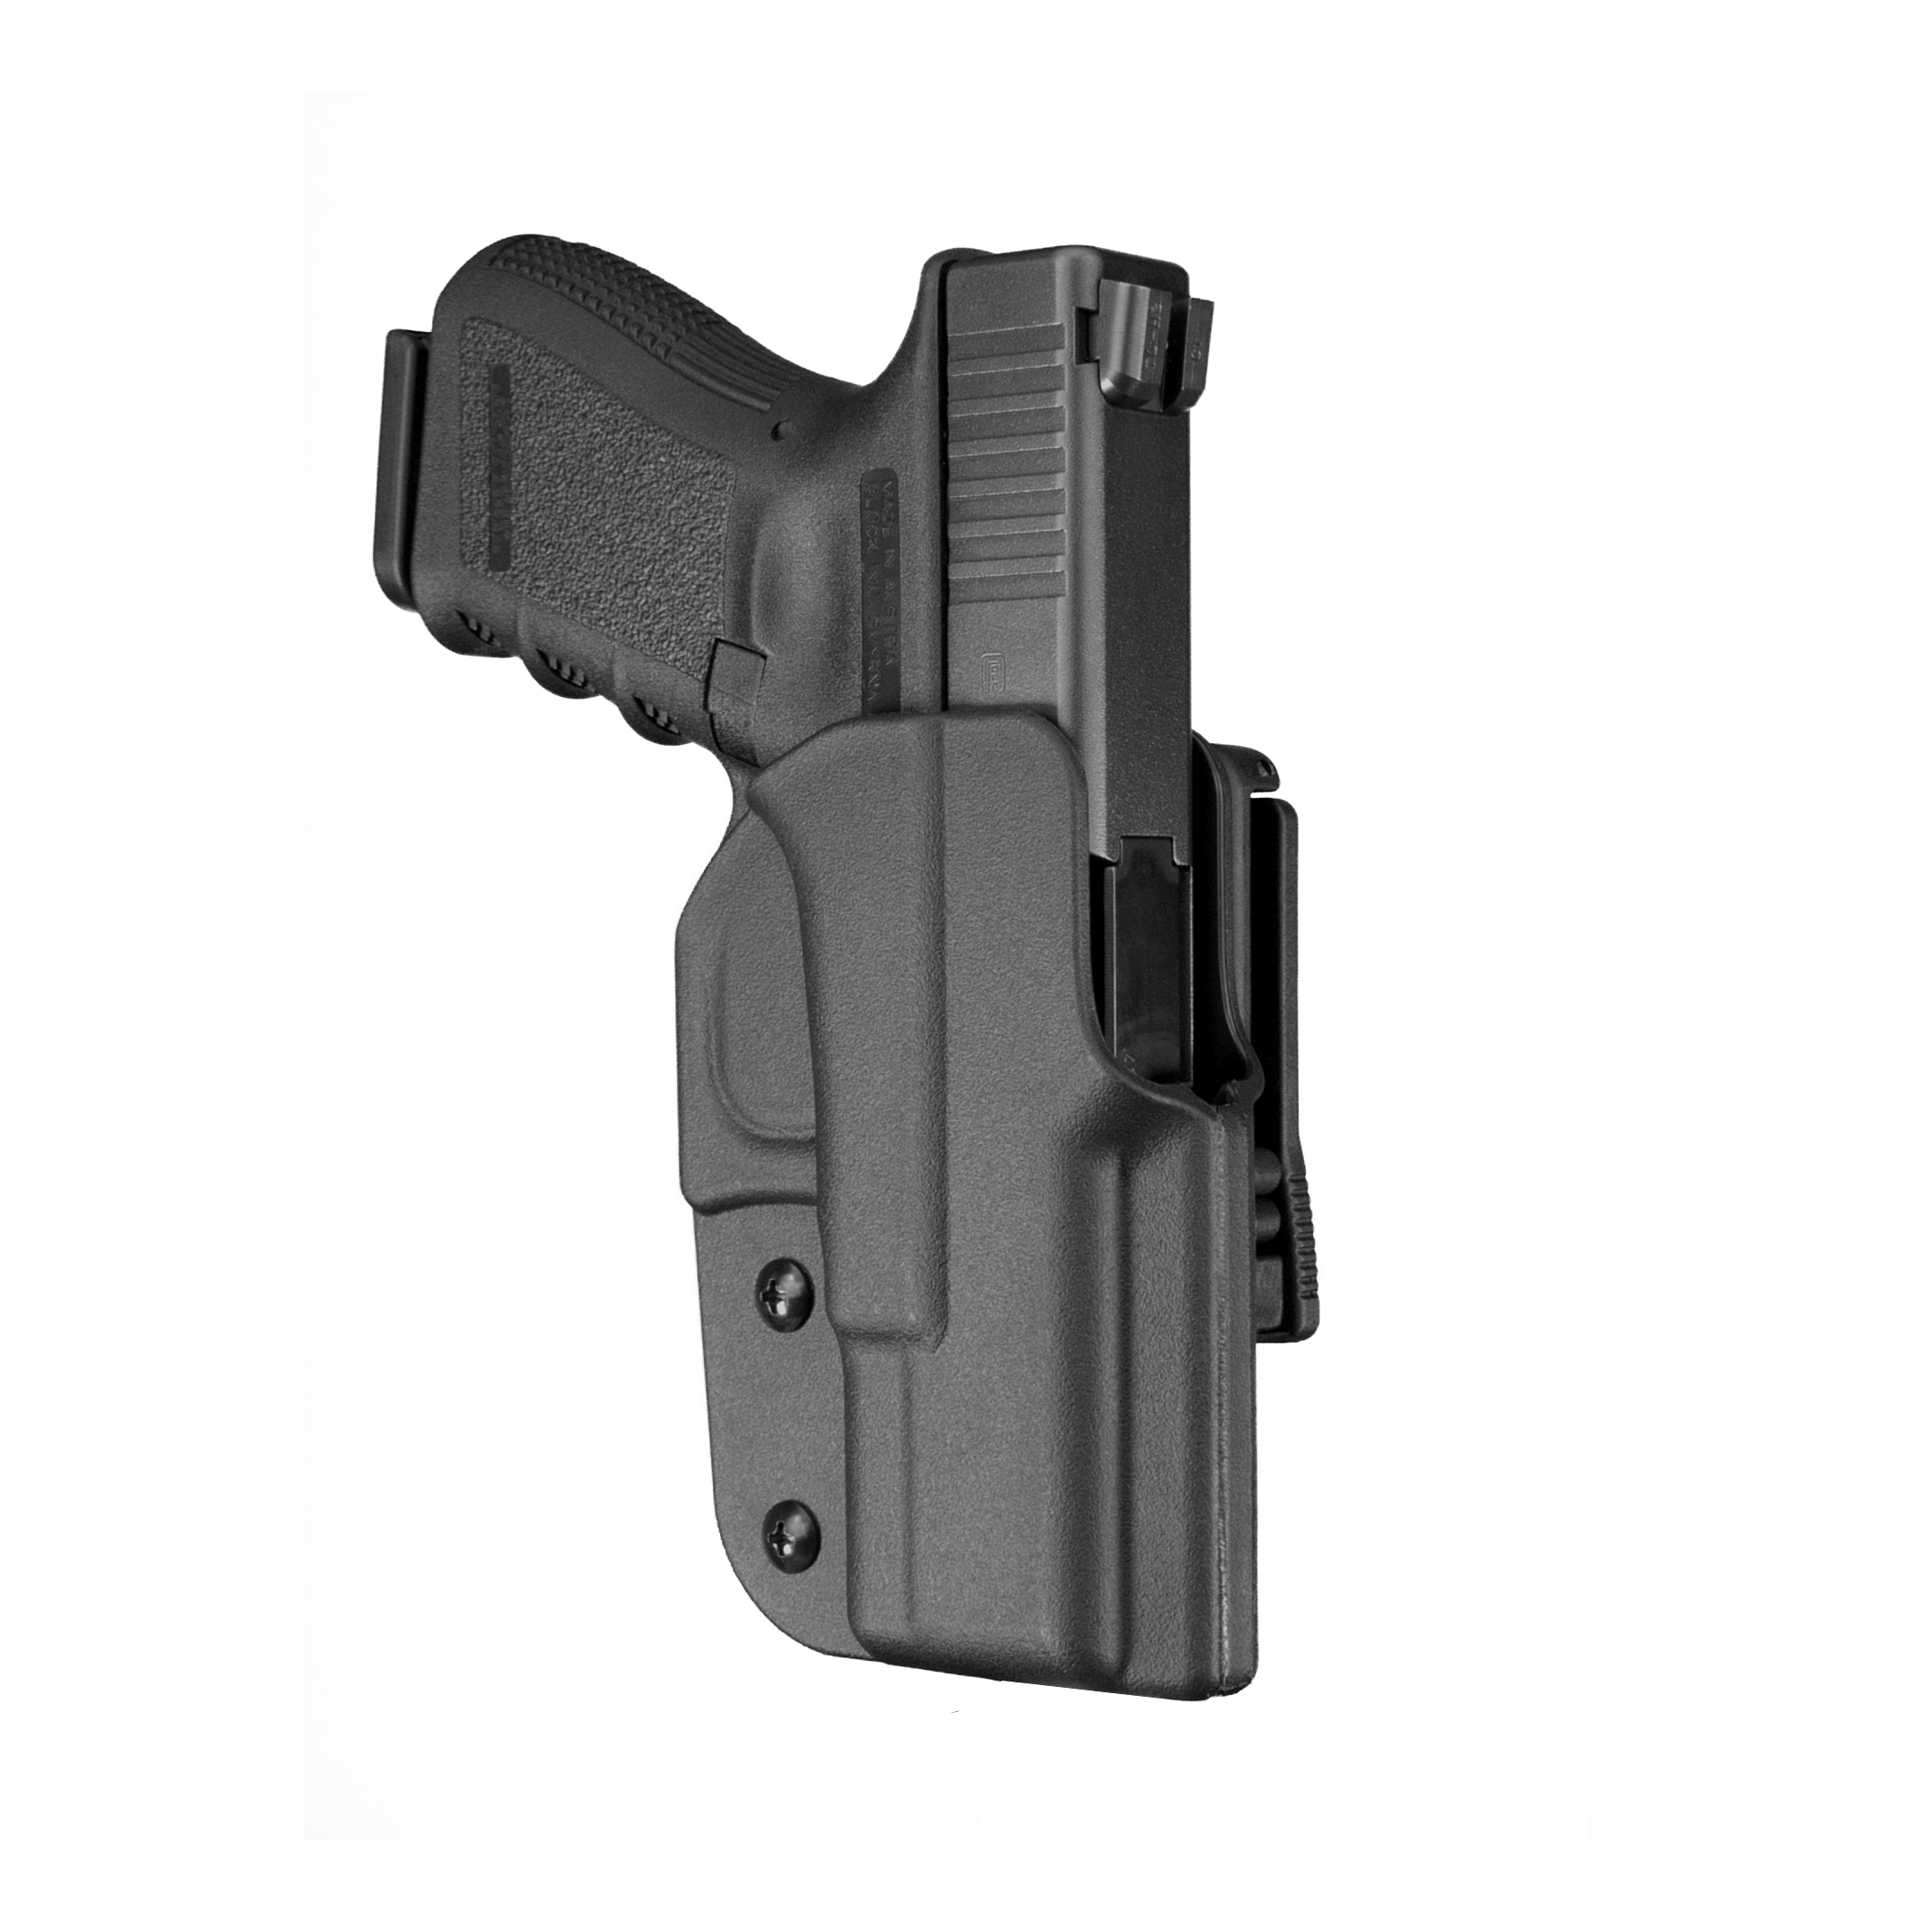 Blade-Tech Signature Outside-The-Waistband Holster